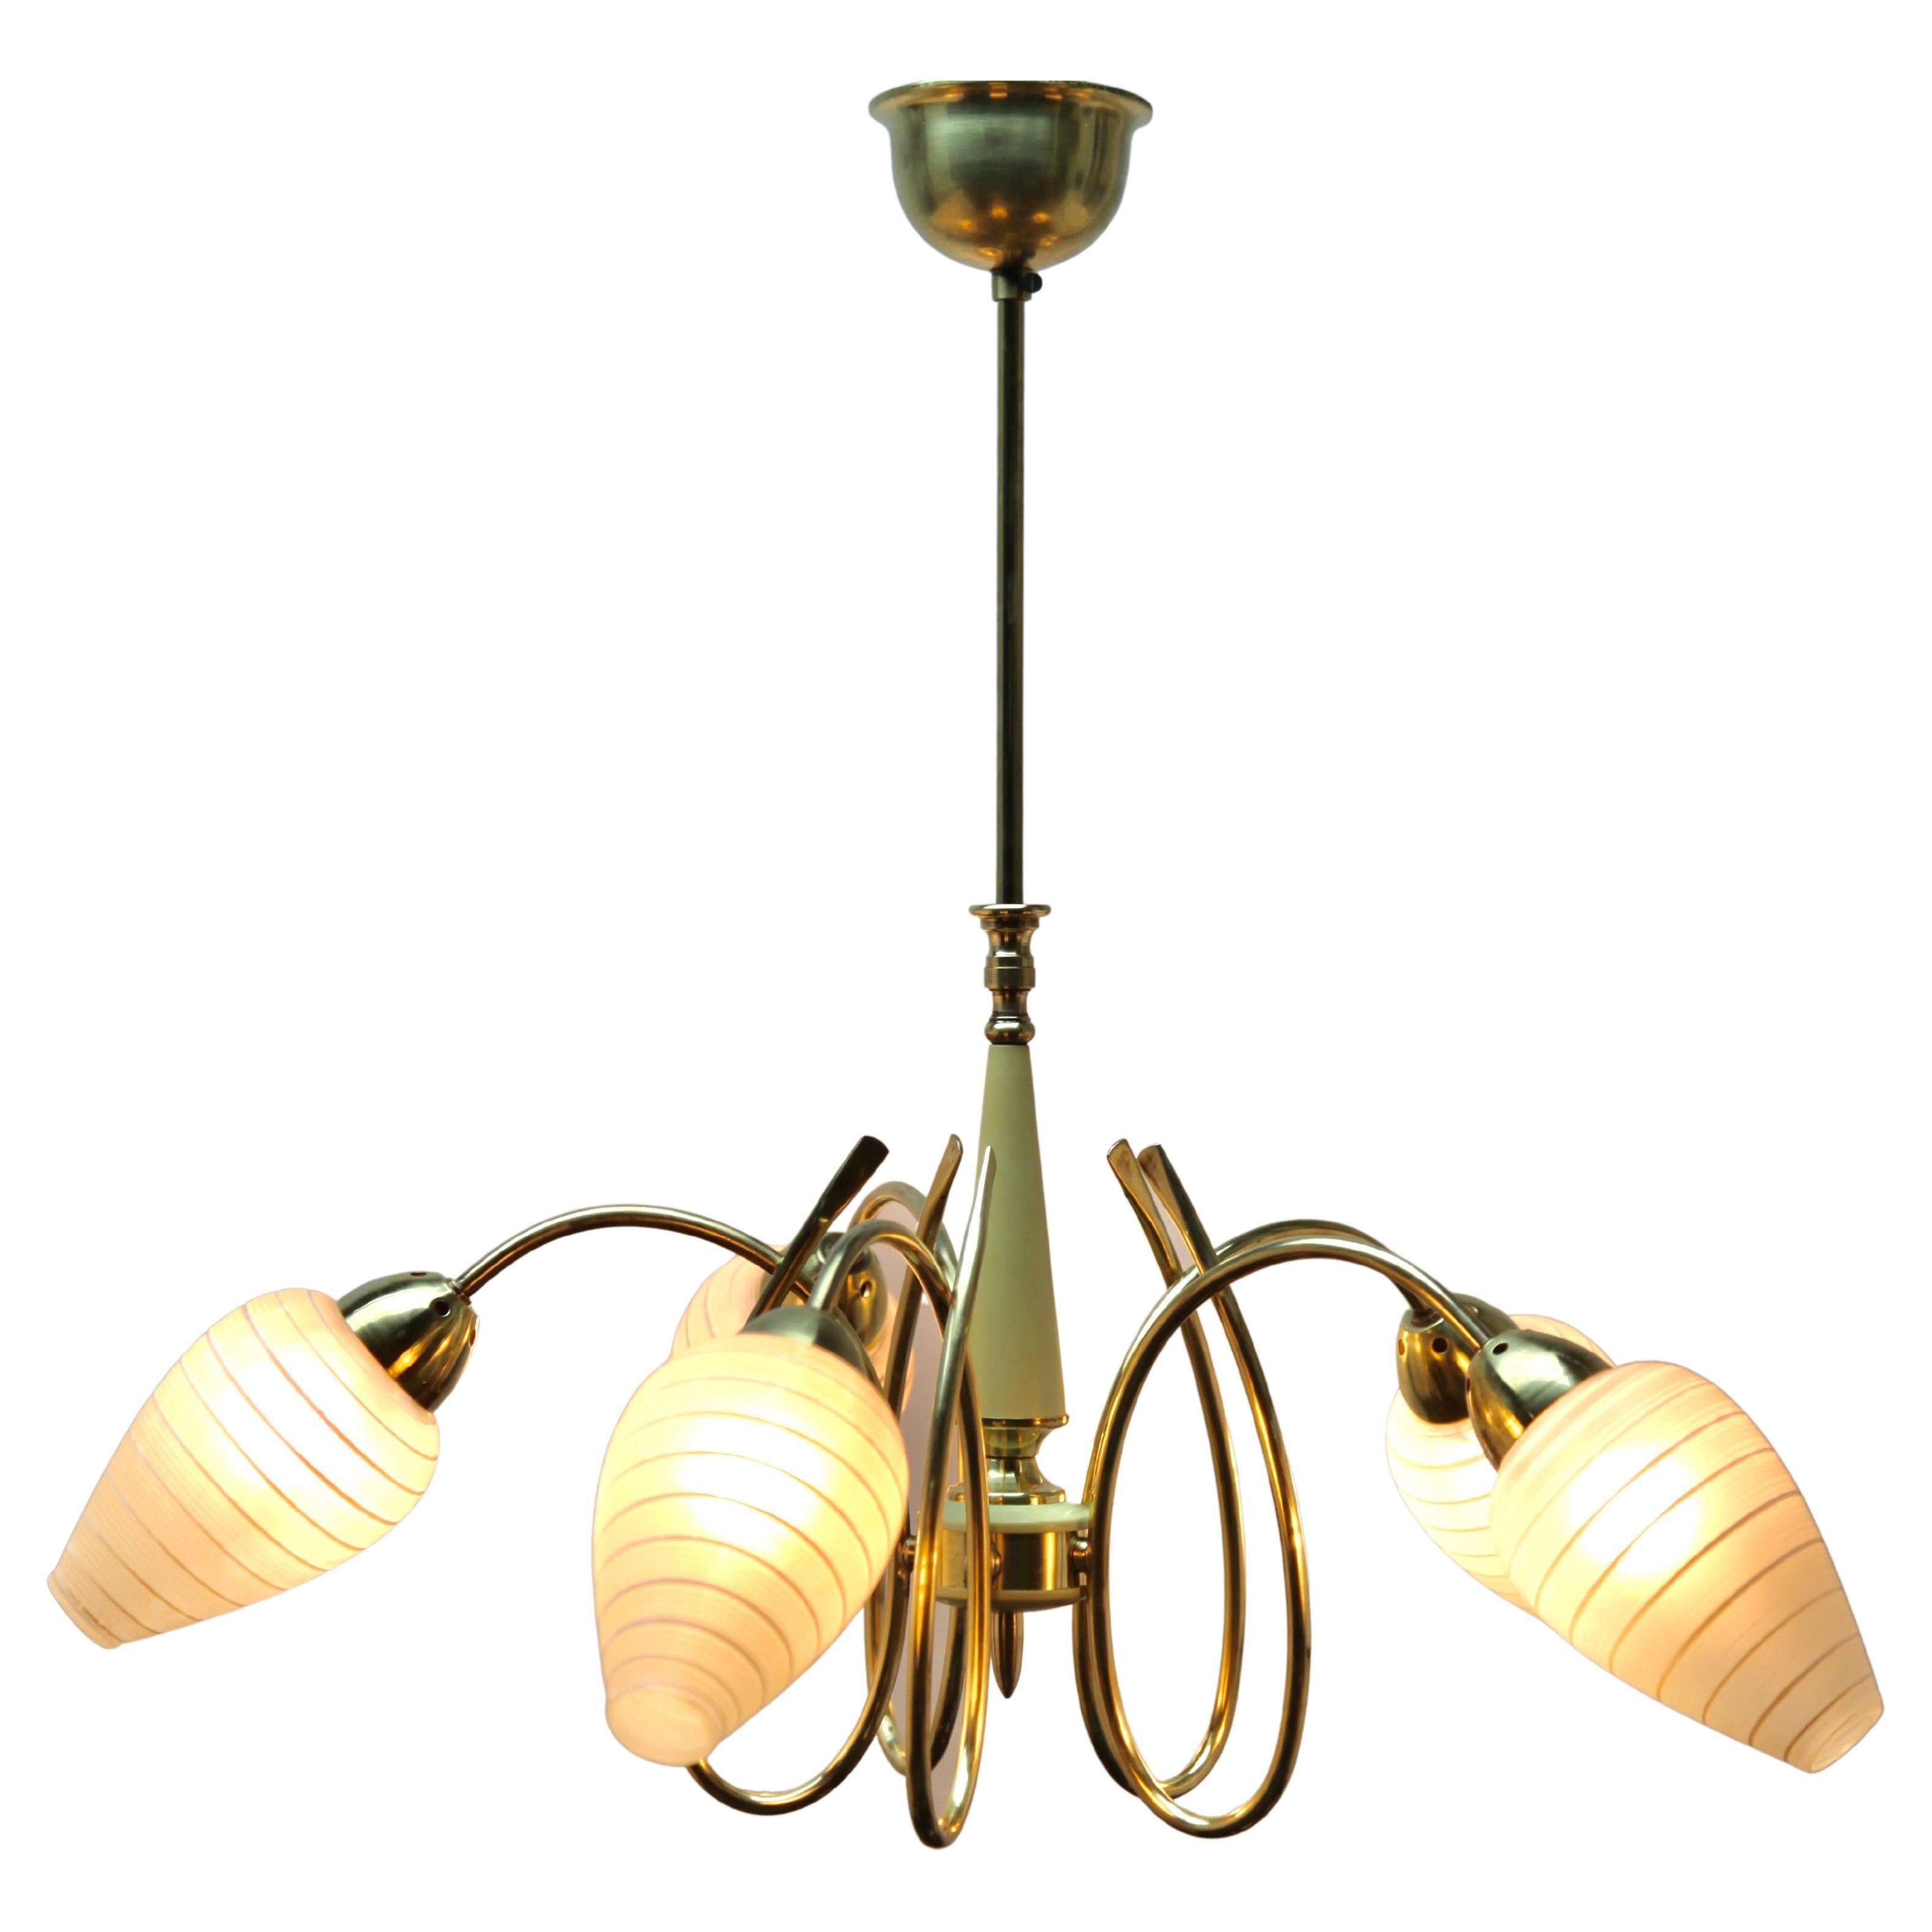 Five arms chandelier style of Stilnovo.
Photography fails to capture the simple elegant illumination provided by this lamp.

Recently cleaned and polished so that it is in excellent condition and in 
full working order 

And safe for immediate